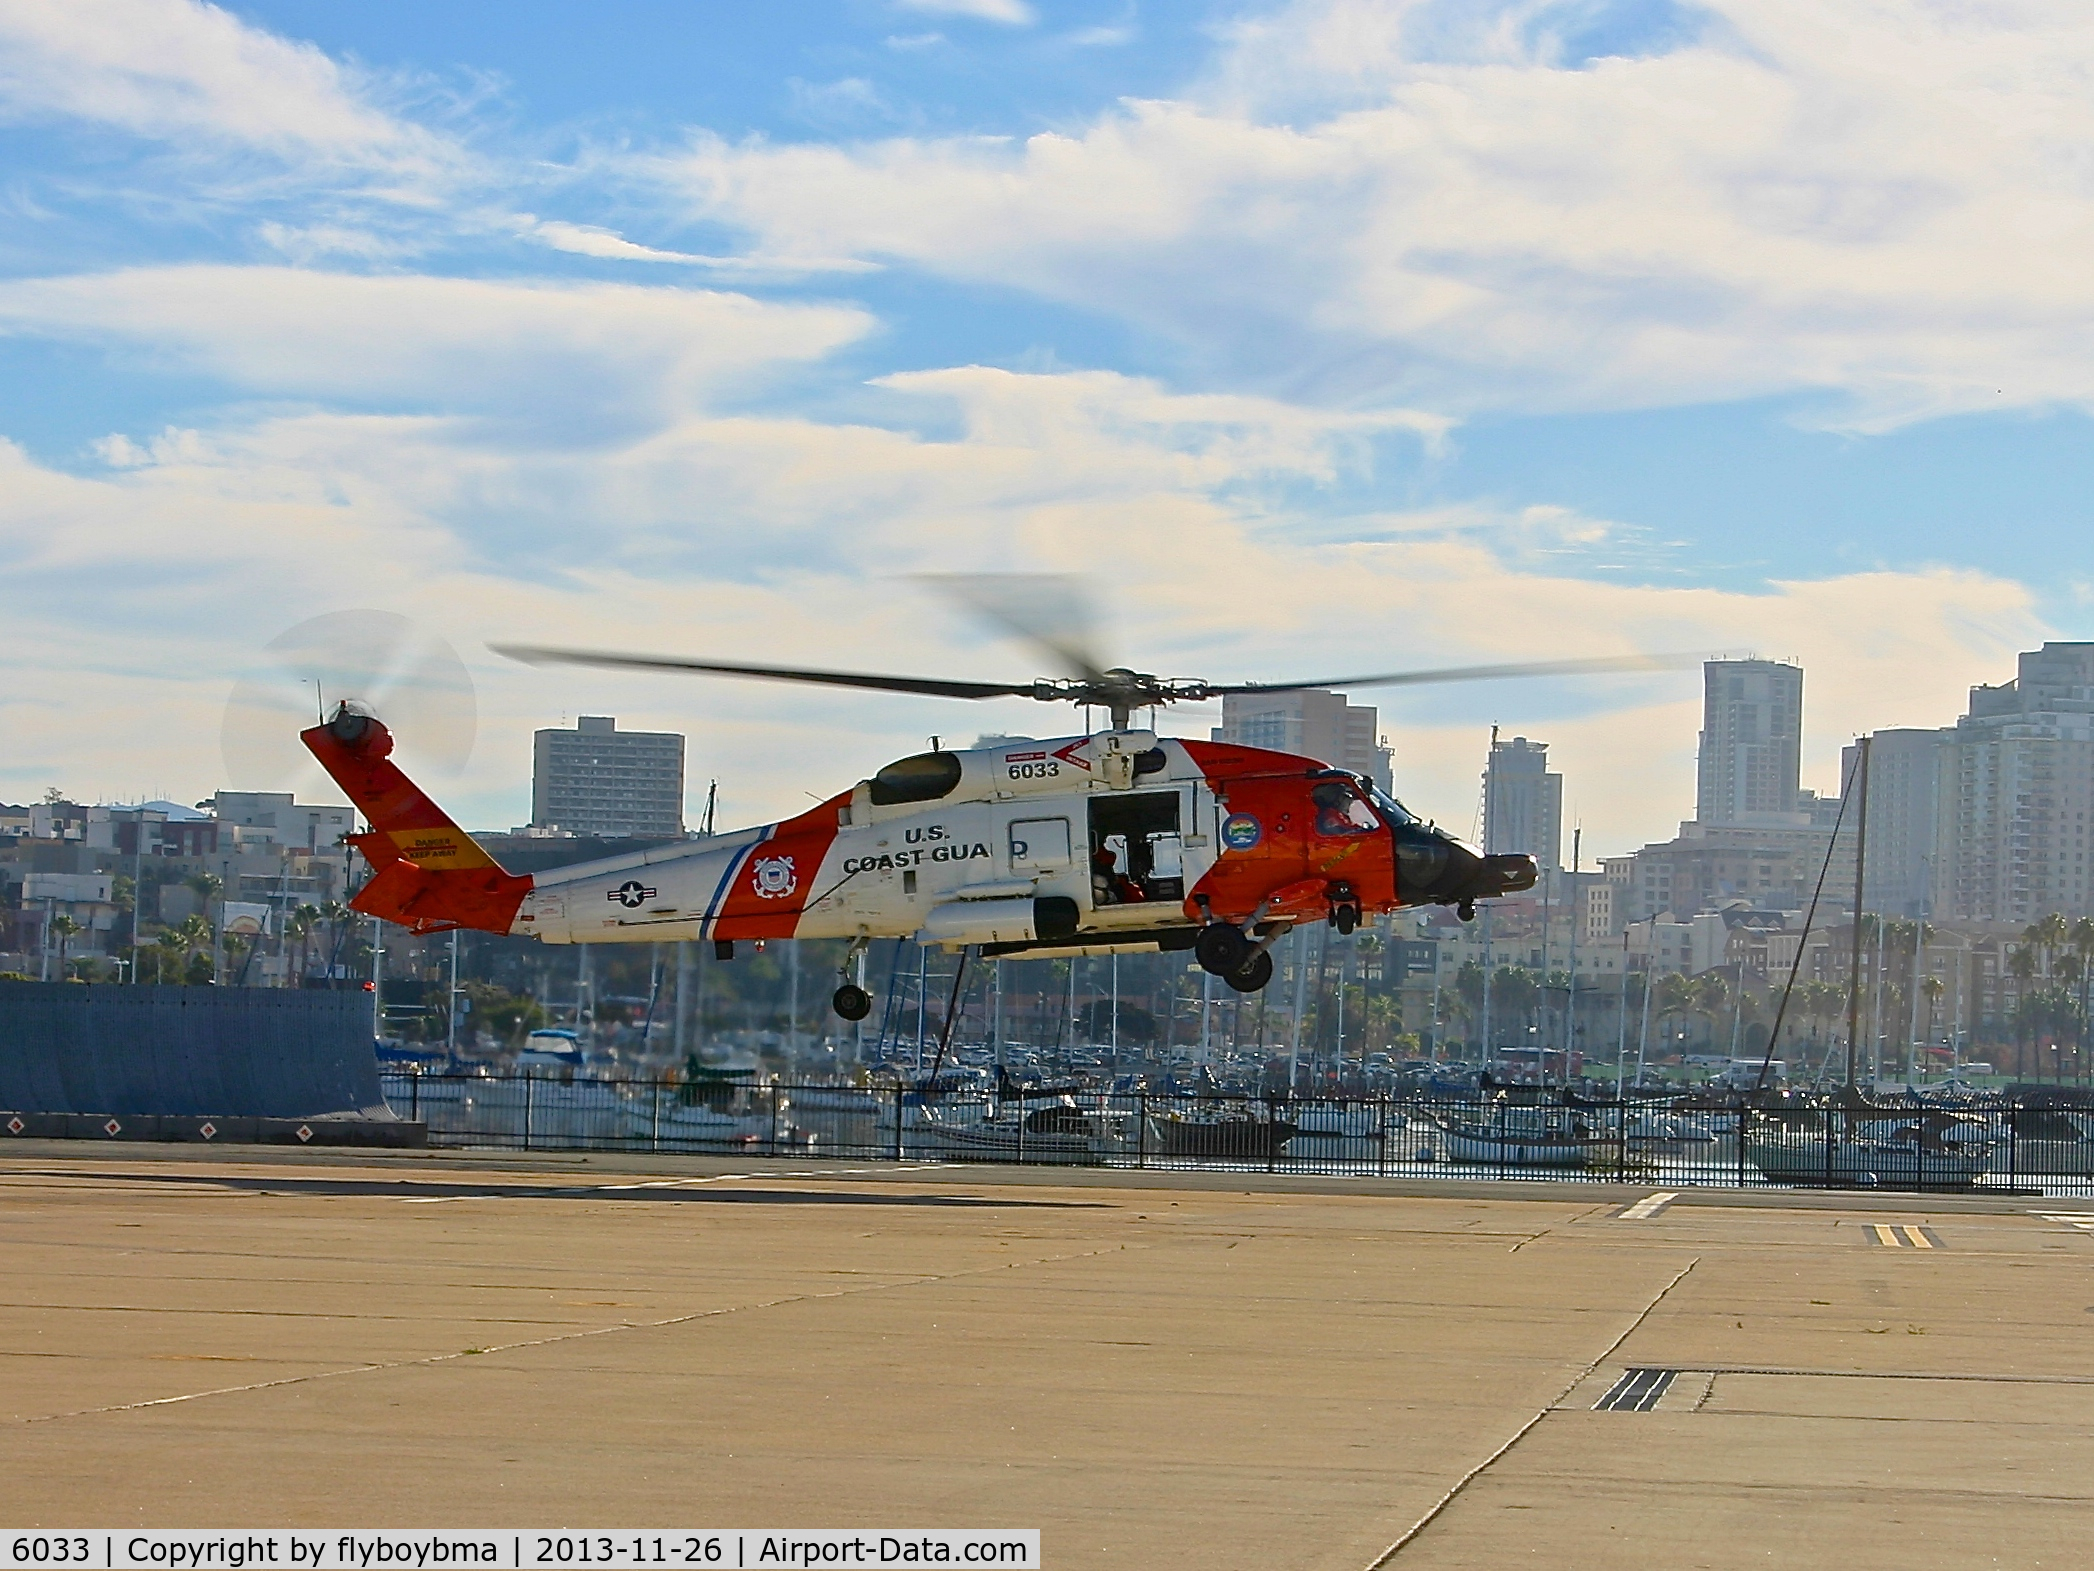 6033, Sikorsky HH-60J Jayhawk C/N 70.1954, Getting ready to take off from CGAS San Diego!